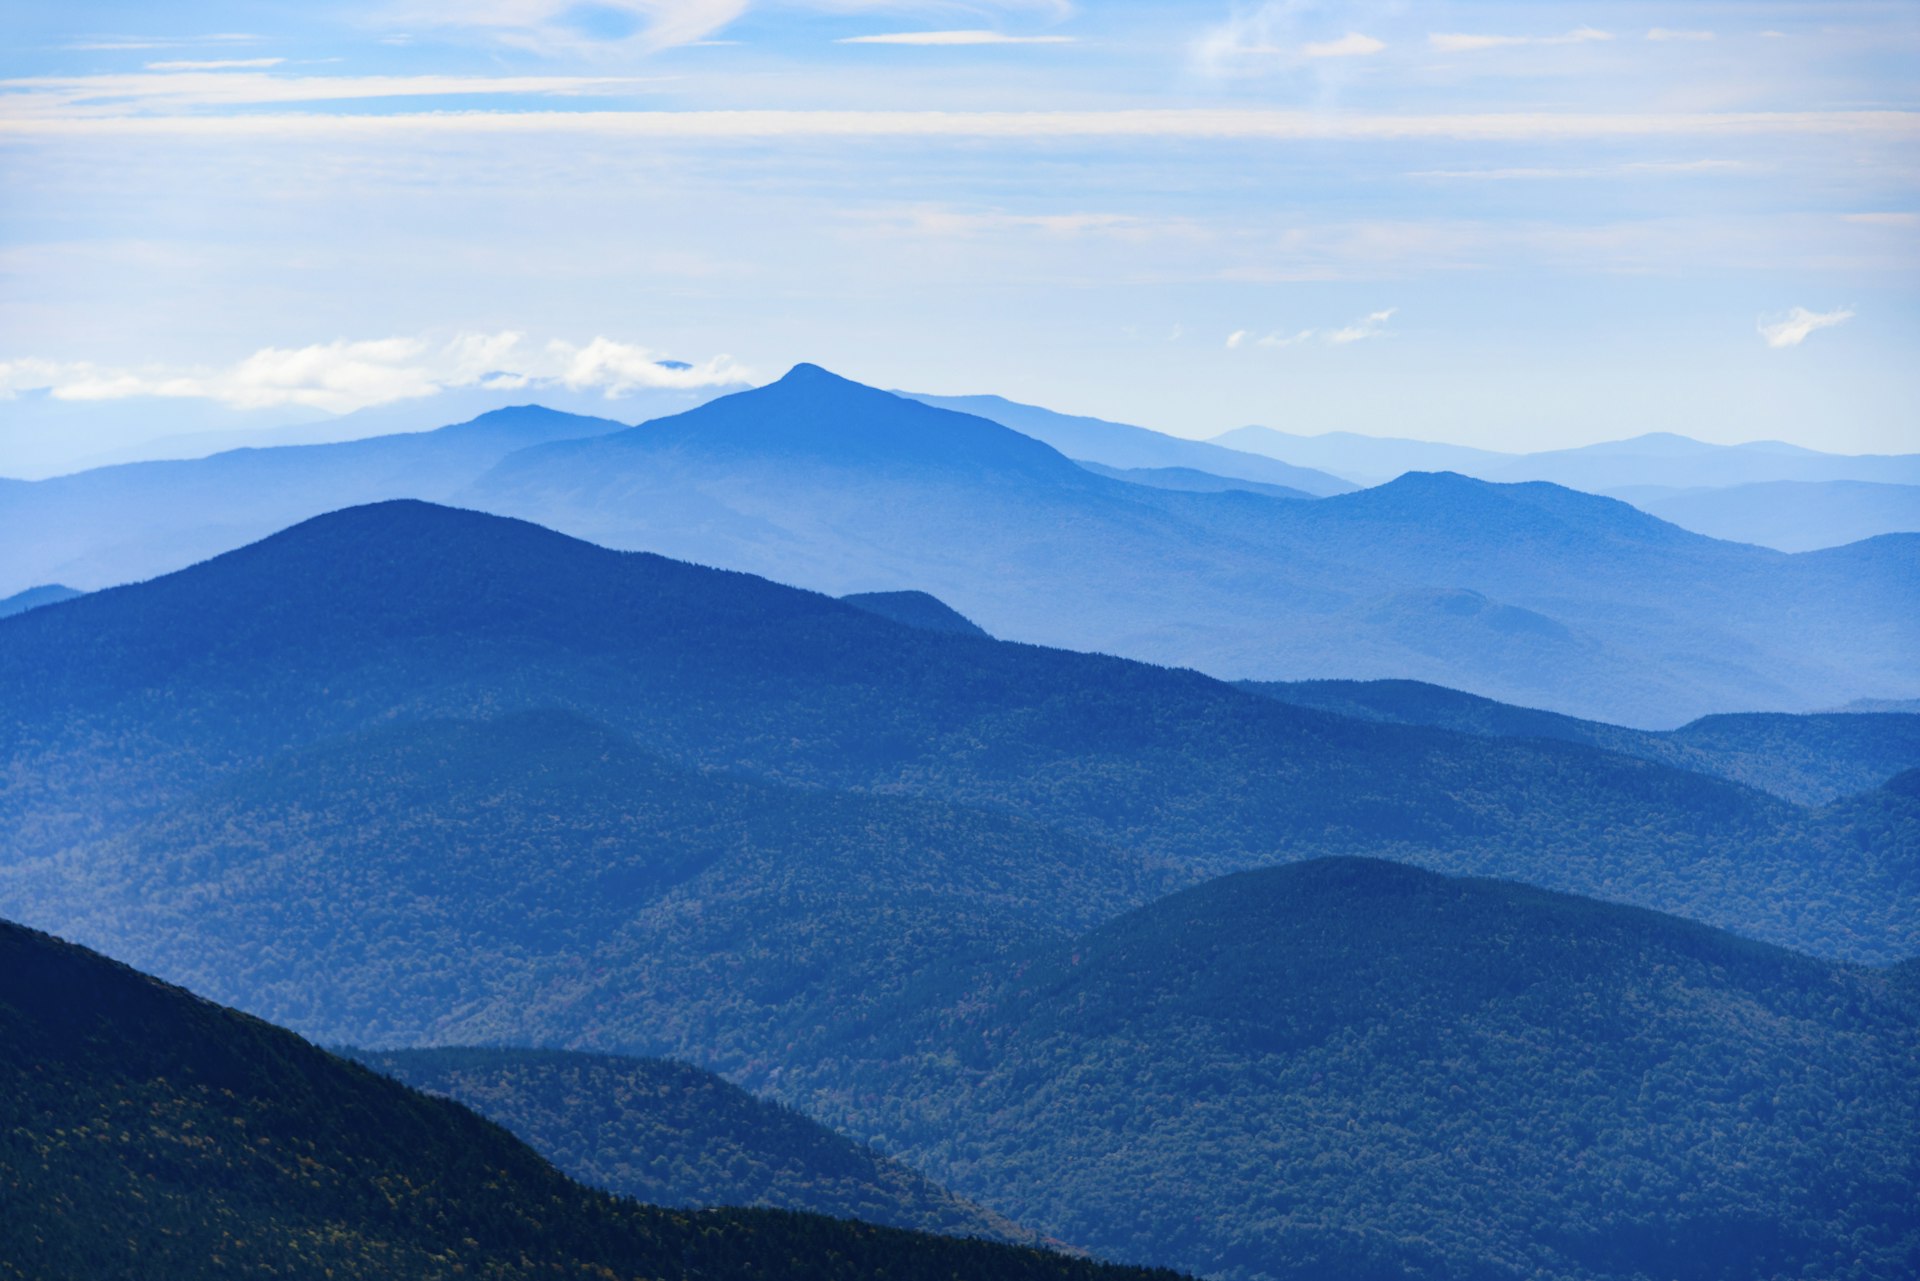 Vermont mountain range seen from the top of Mount Mansfield